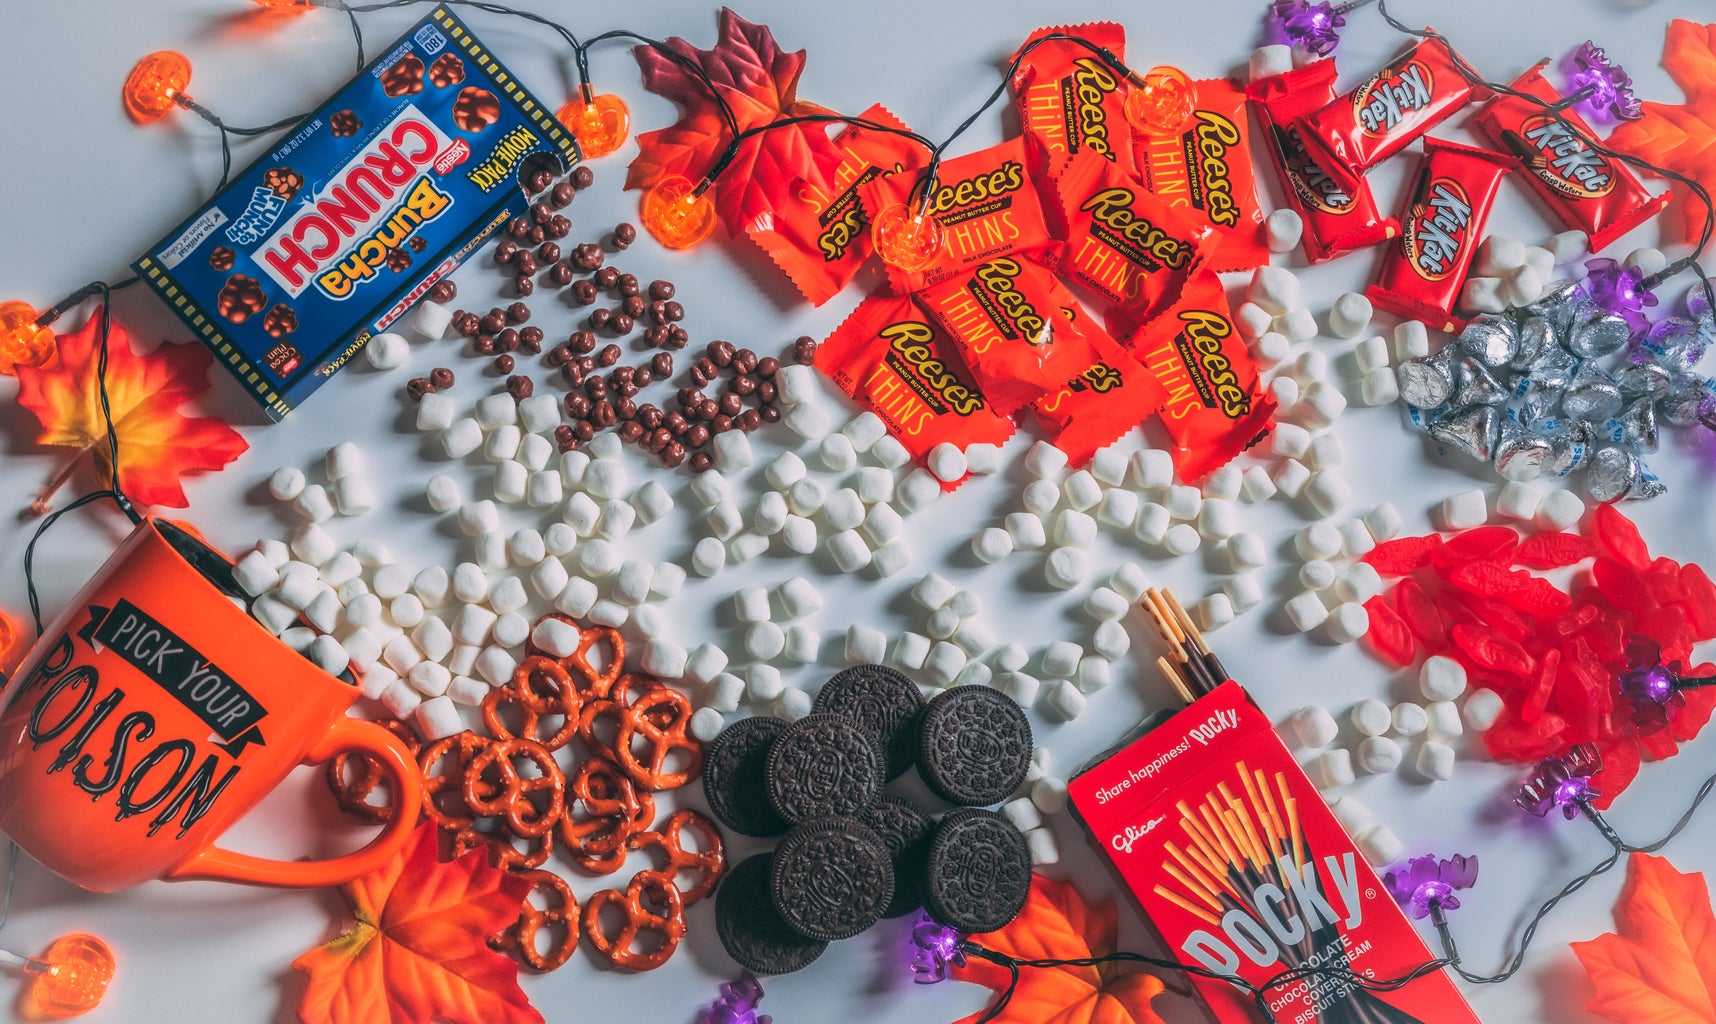 Candy and Halloween decorations are spread across a table.